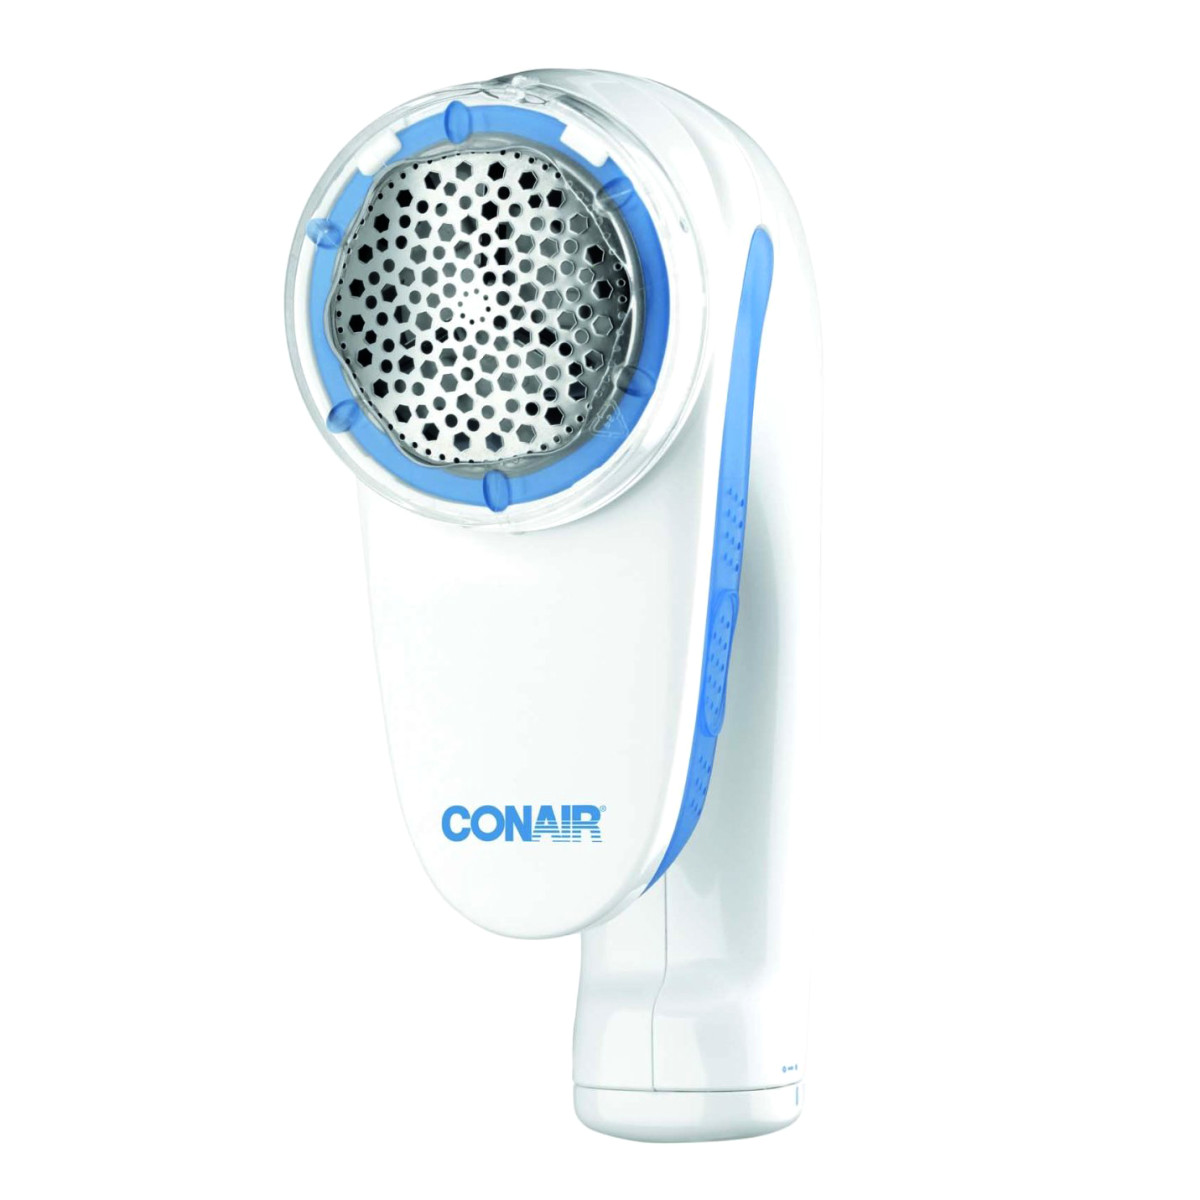 Conair Battery Operated Fabric Defuzzer, $11.99, available at Amazon.